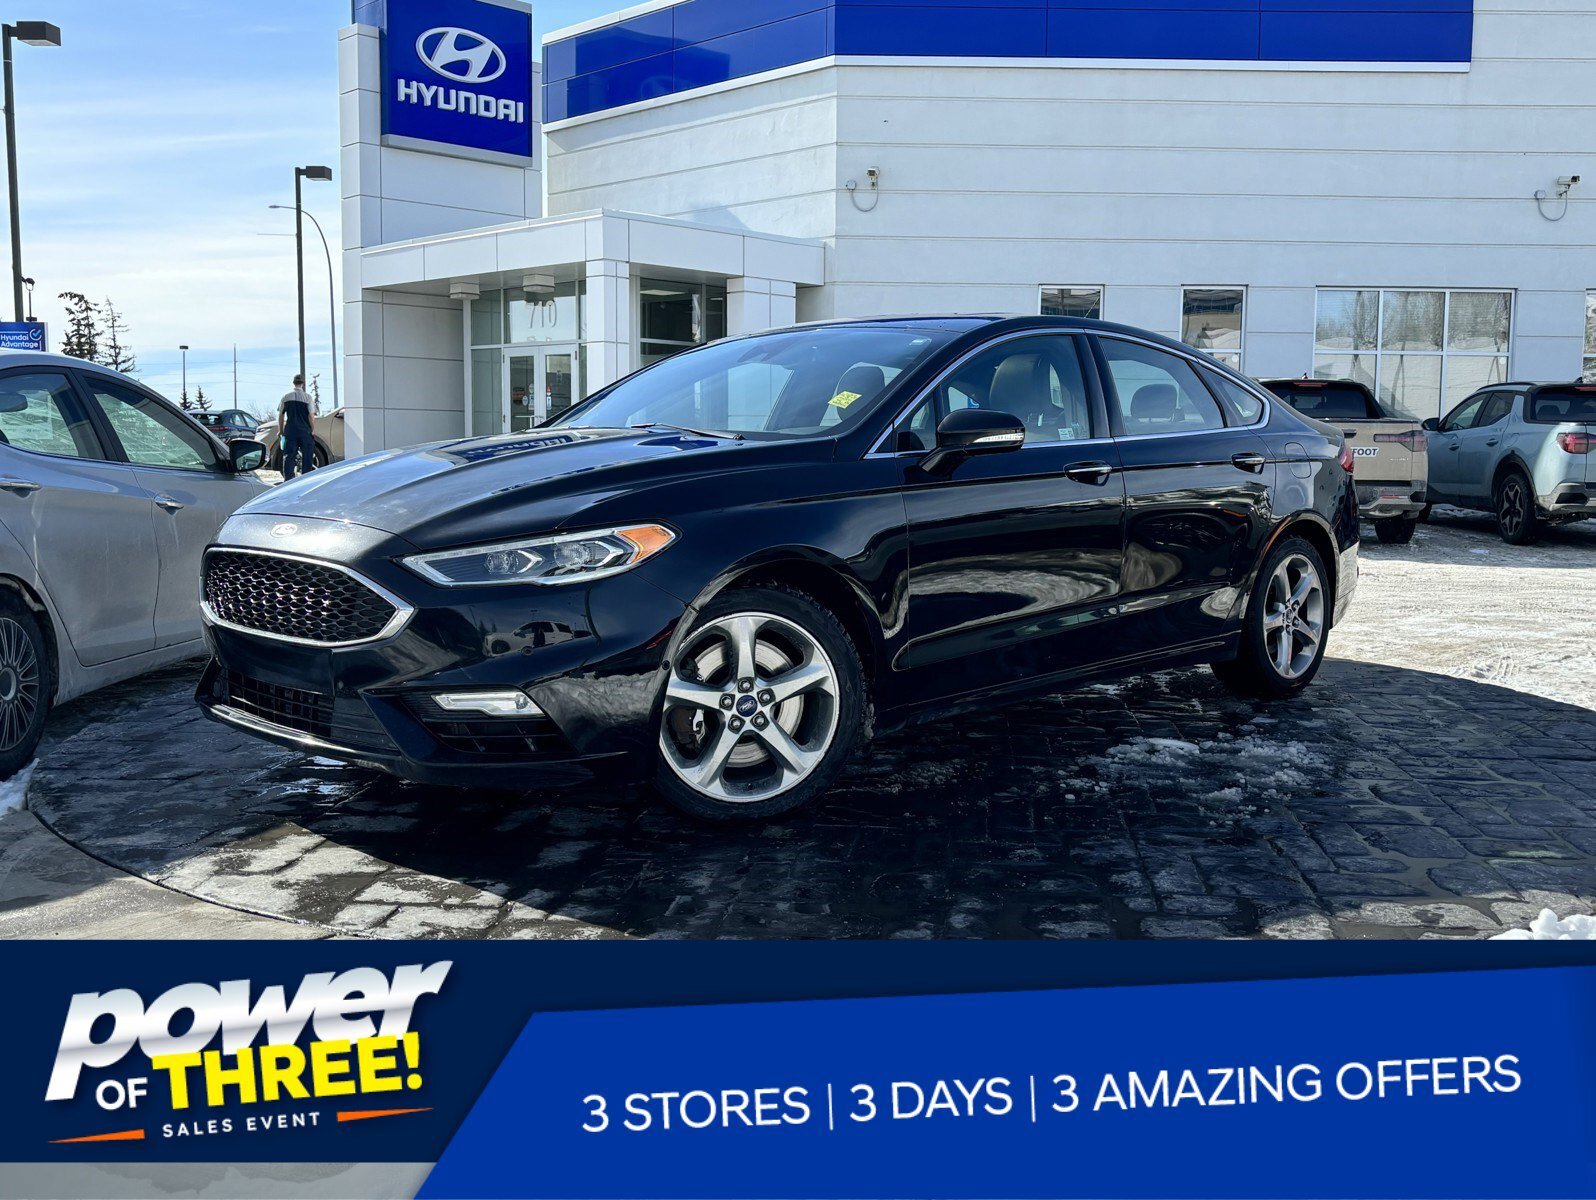 2017 Ford Fusion V6 Sport - AWD, One Owner, No Accidents, Sunroof